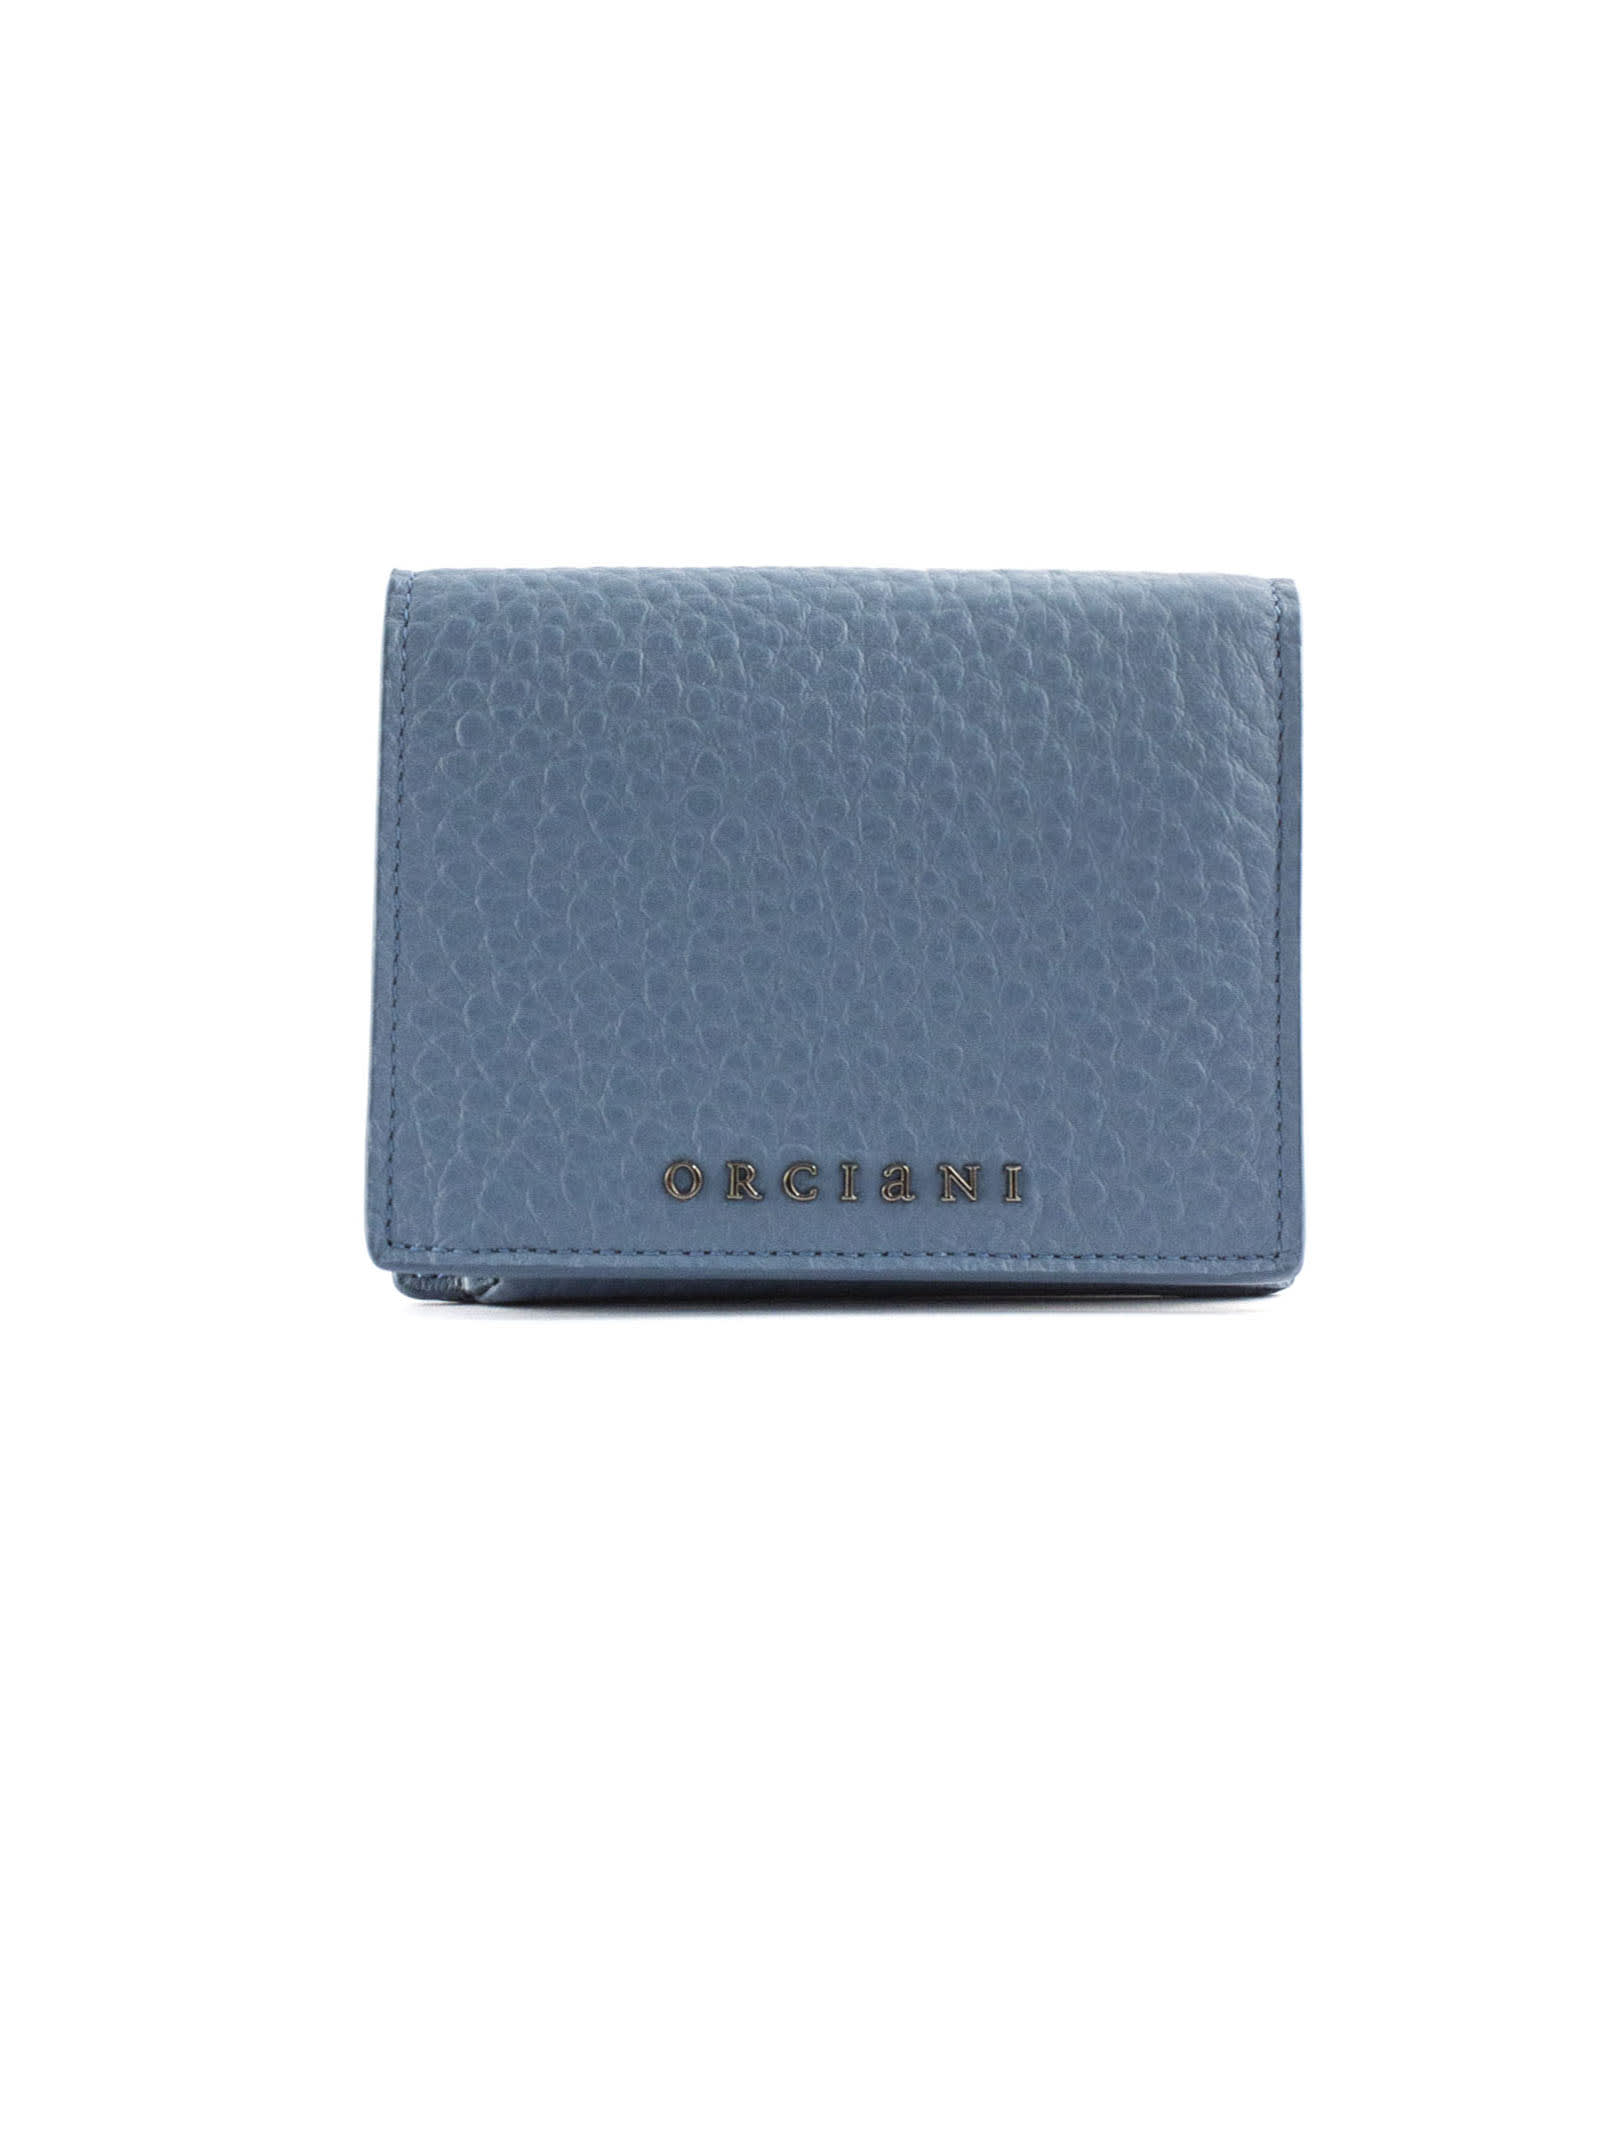 Orciani Light Blue Soft Leather Wallet